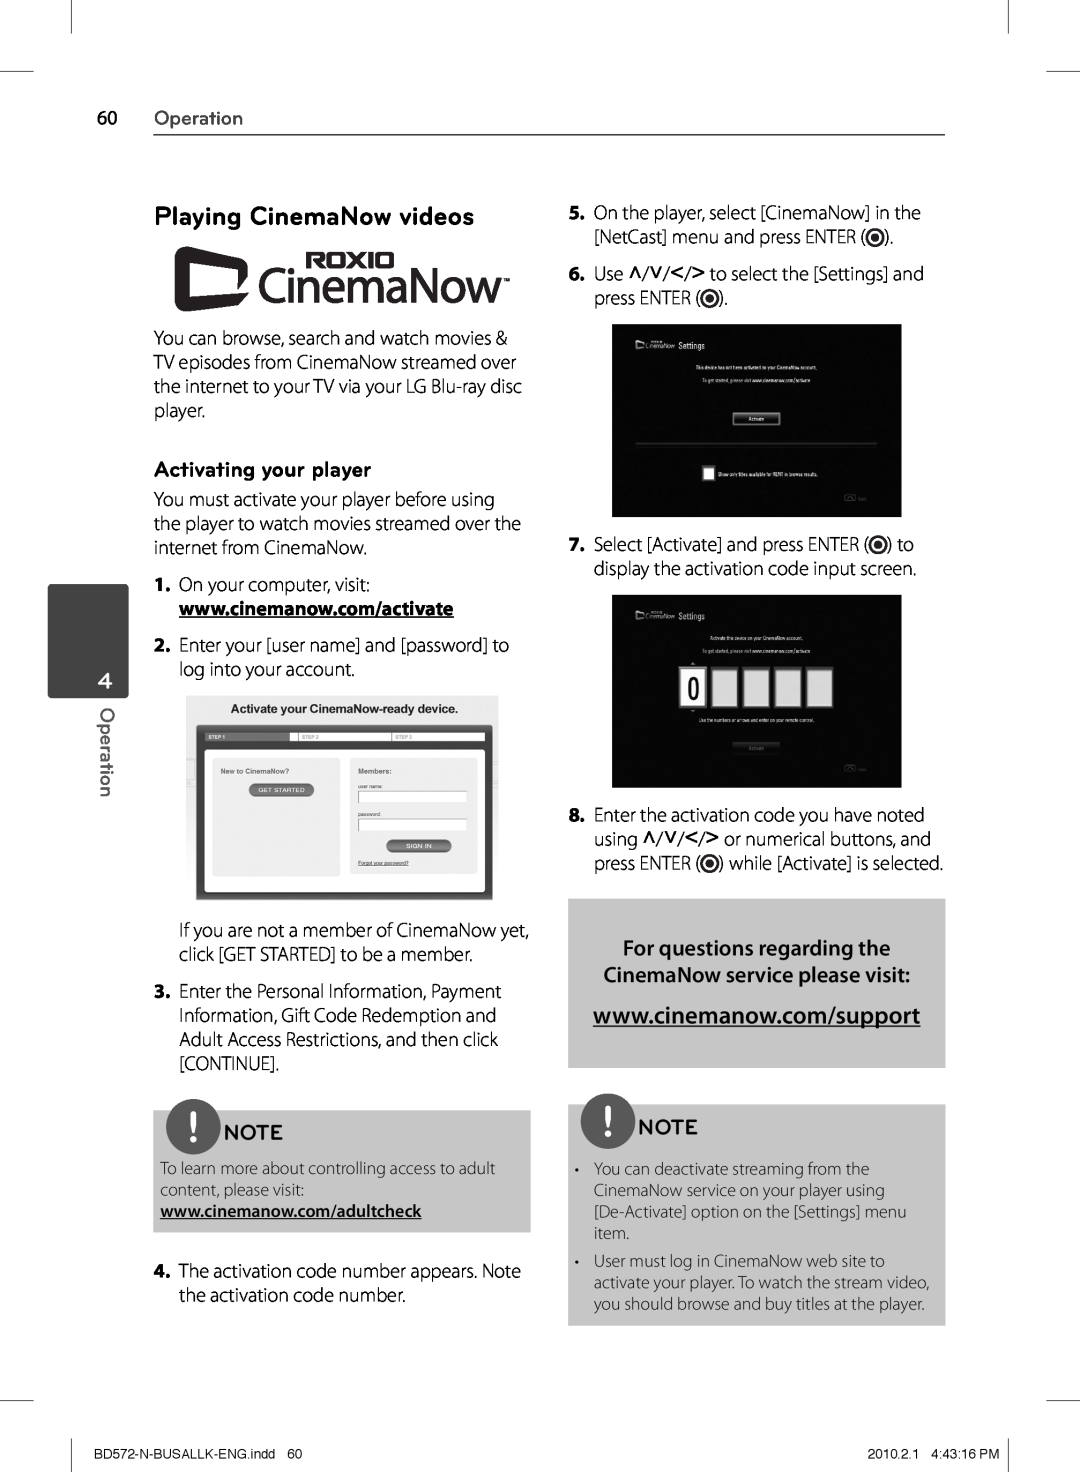 LG Electronics BD570 Playing CinemaNow videos, For questions regarding the CinemaNow service please visit, Operation 